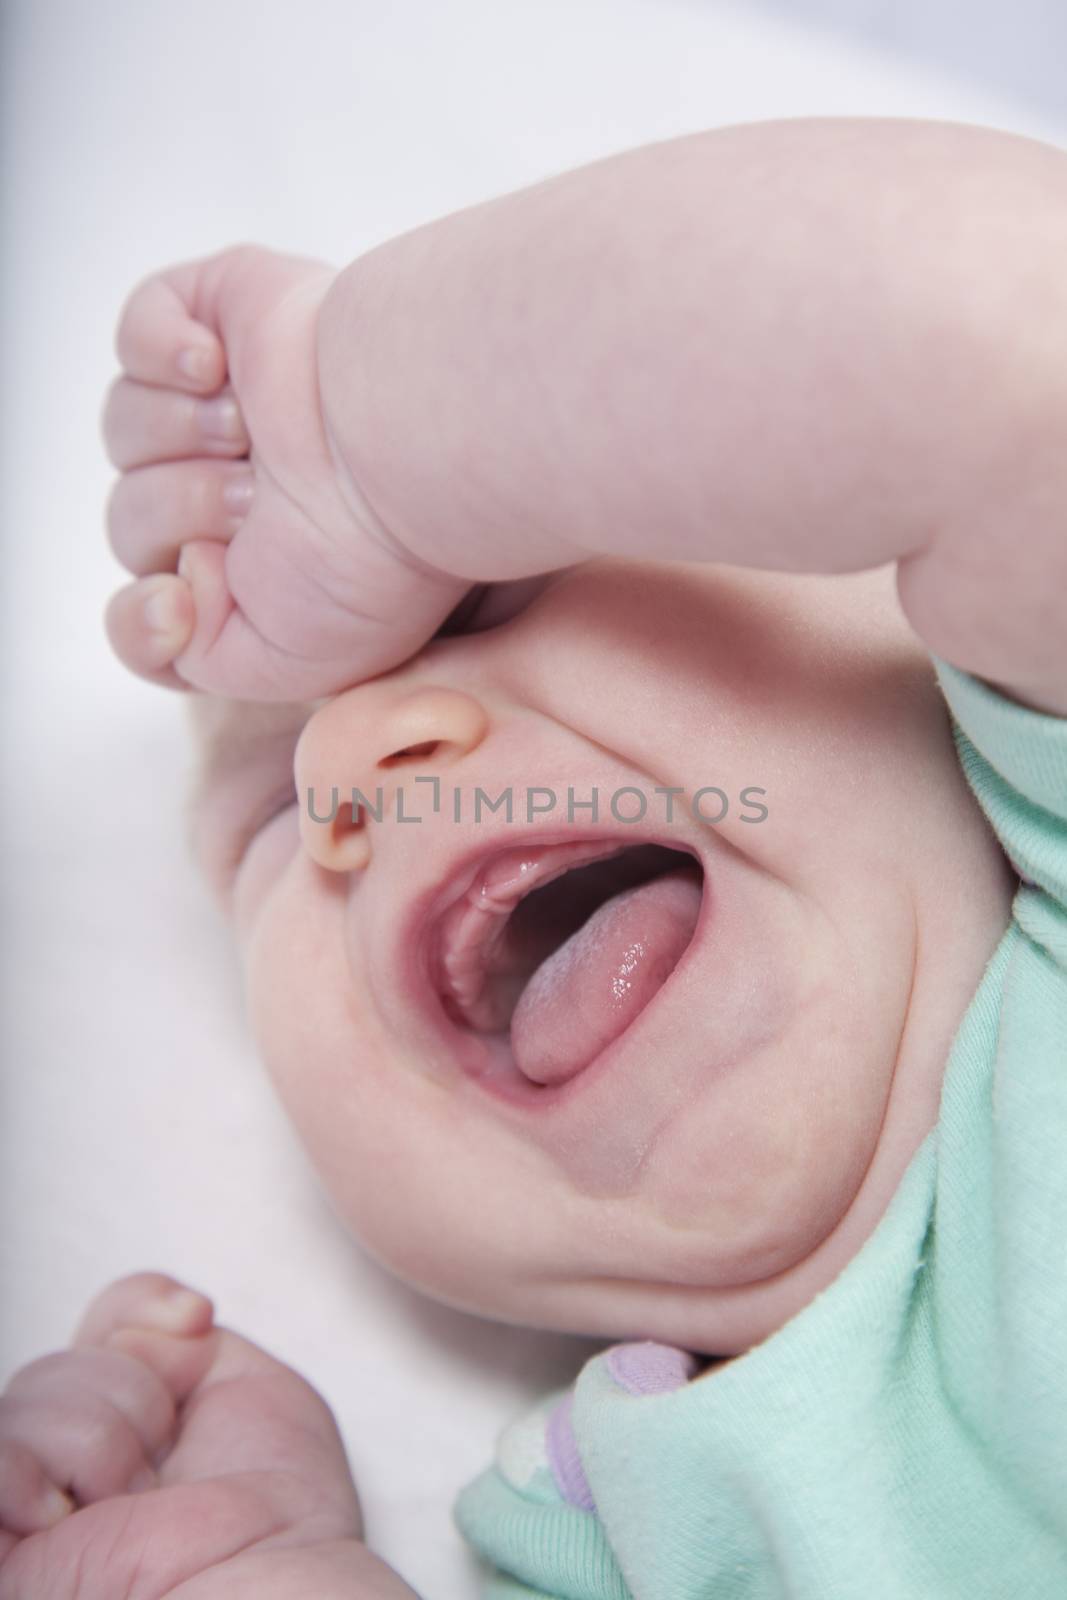 one month age baby green onesie shirt crying and shout close eyes tongue over white bedcover